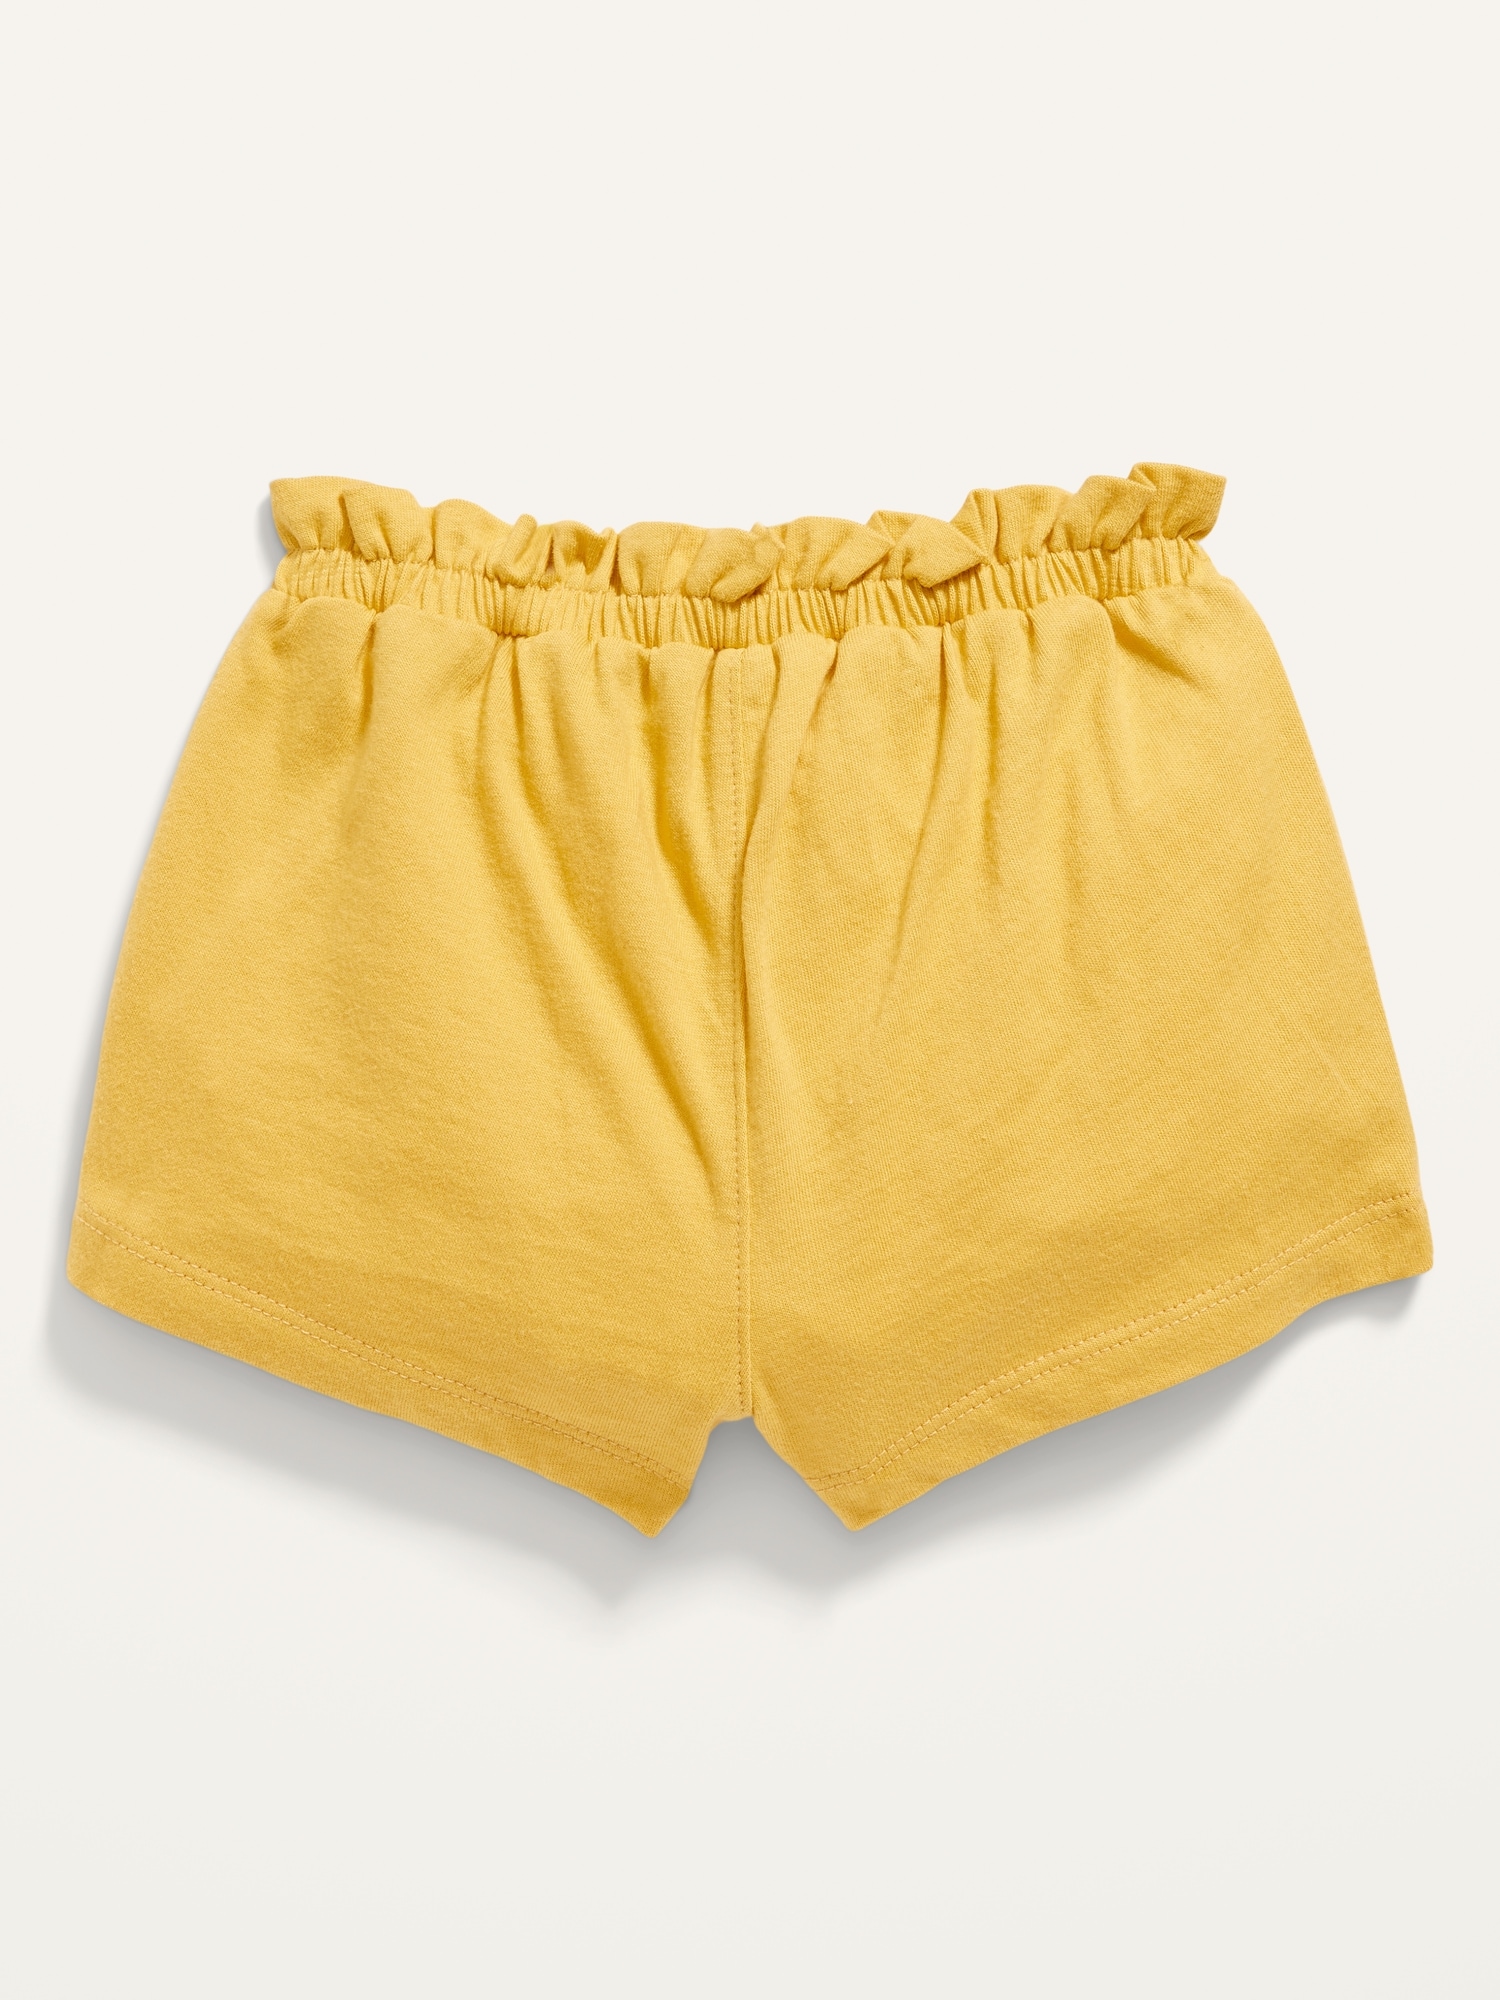 Solid Jersey-Knit Pull-On Shorts for Baby | Old Navy